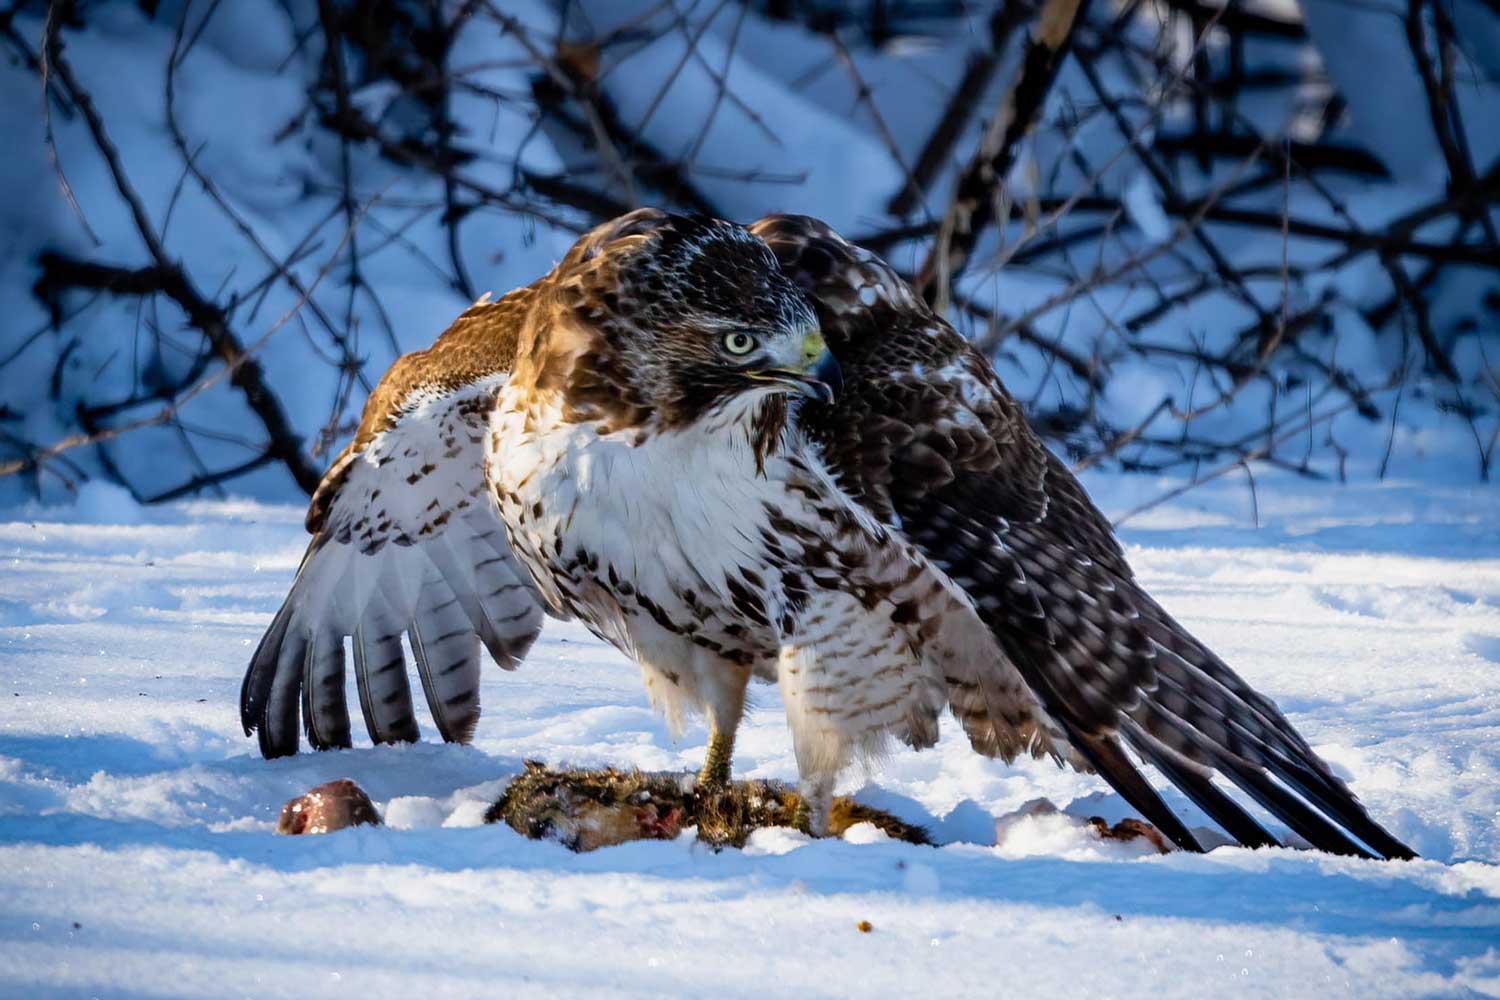 A red-tailed hawk standing on the snow-covered ground with a dead animal.